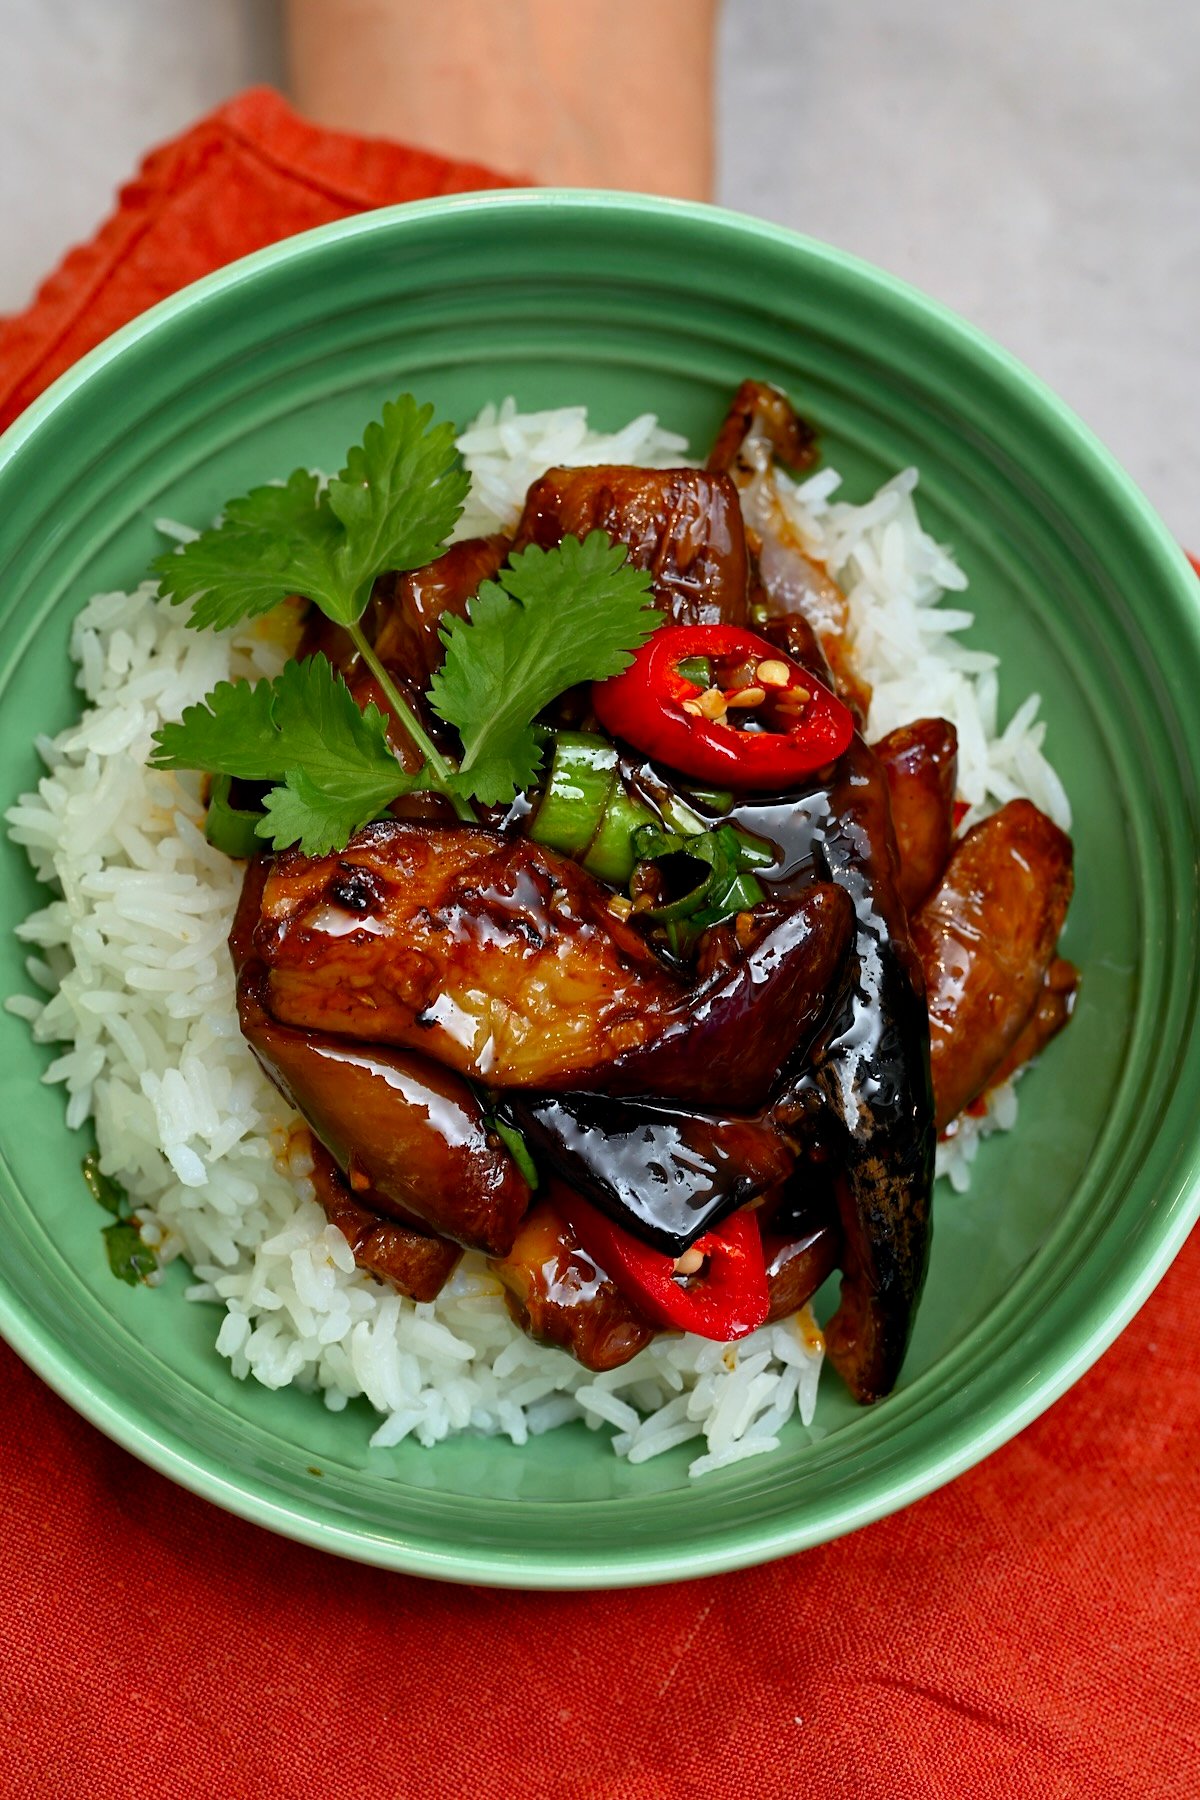 Chinese eggplant stir fry topped with red chili and cilantro over rice